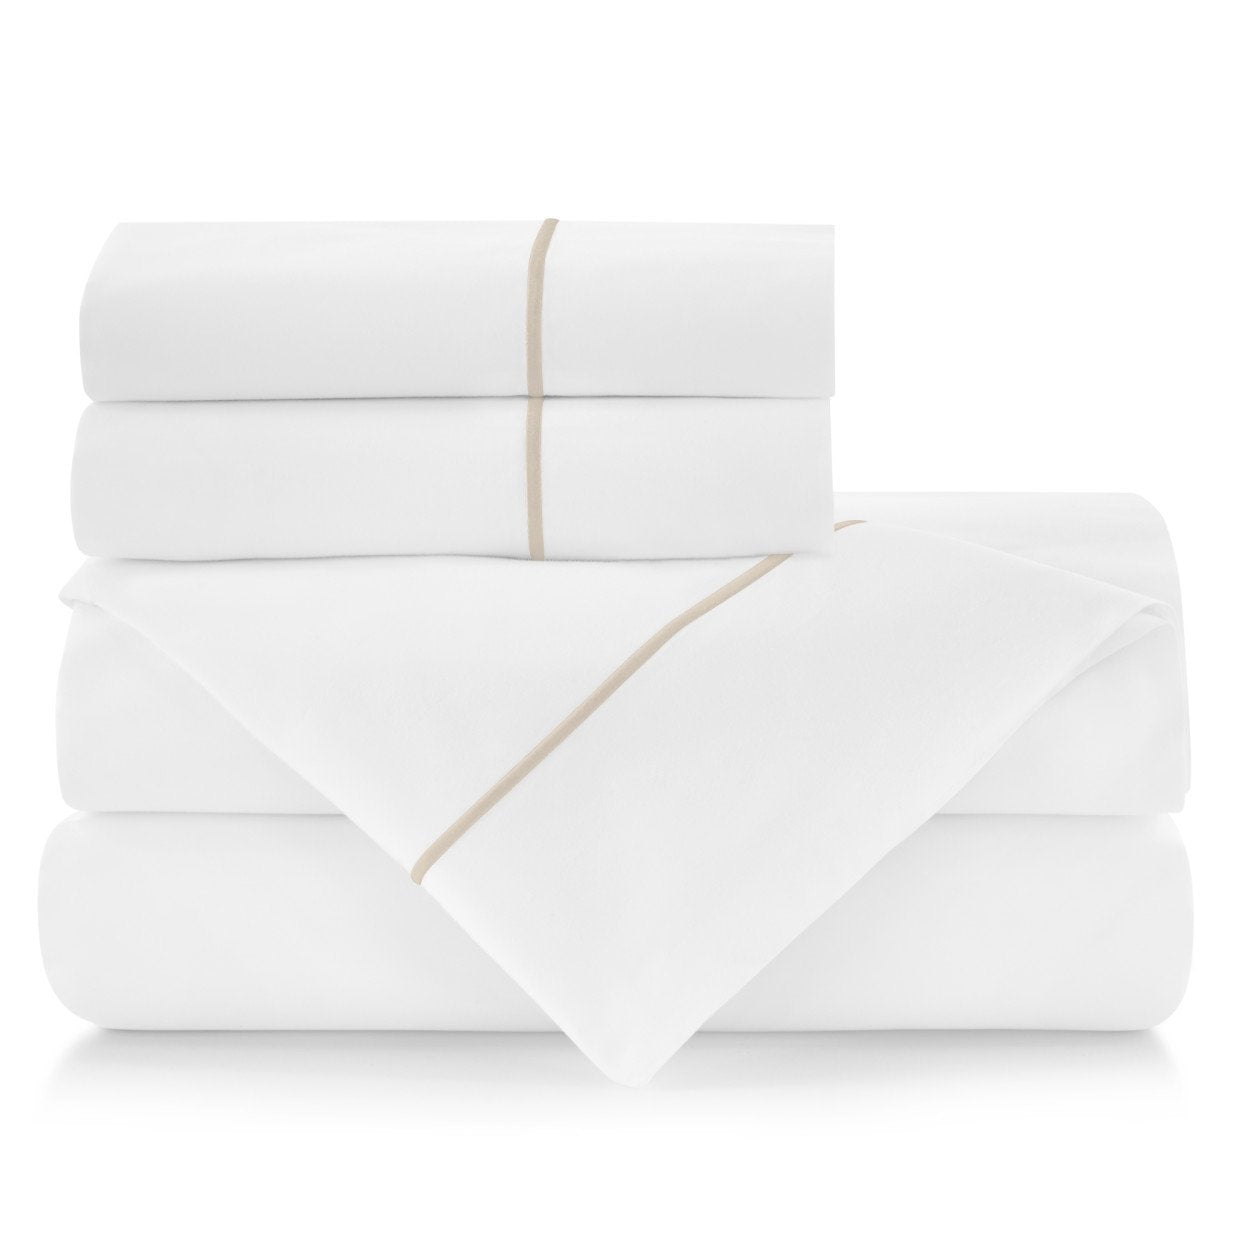 Peacock Alley Soprano II Embroidered Sateen Sheet Set